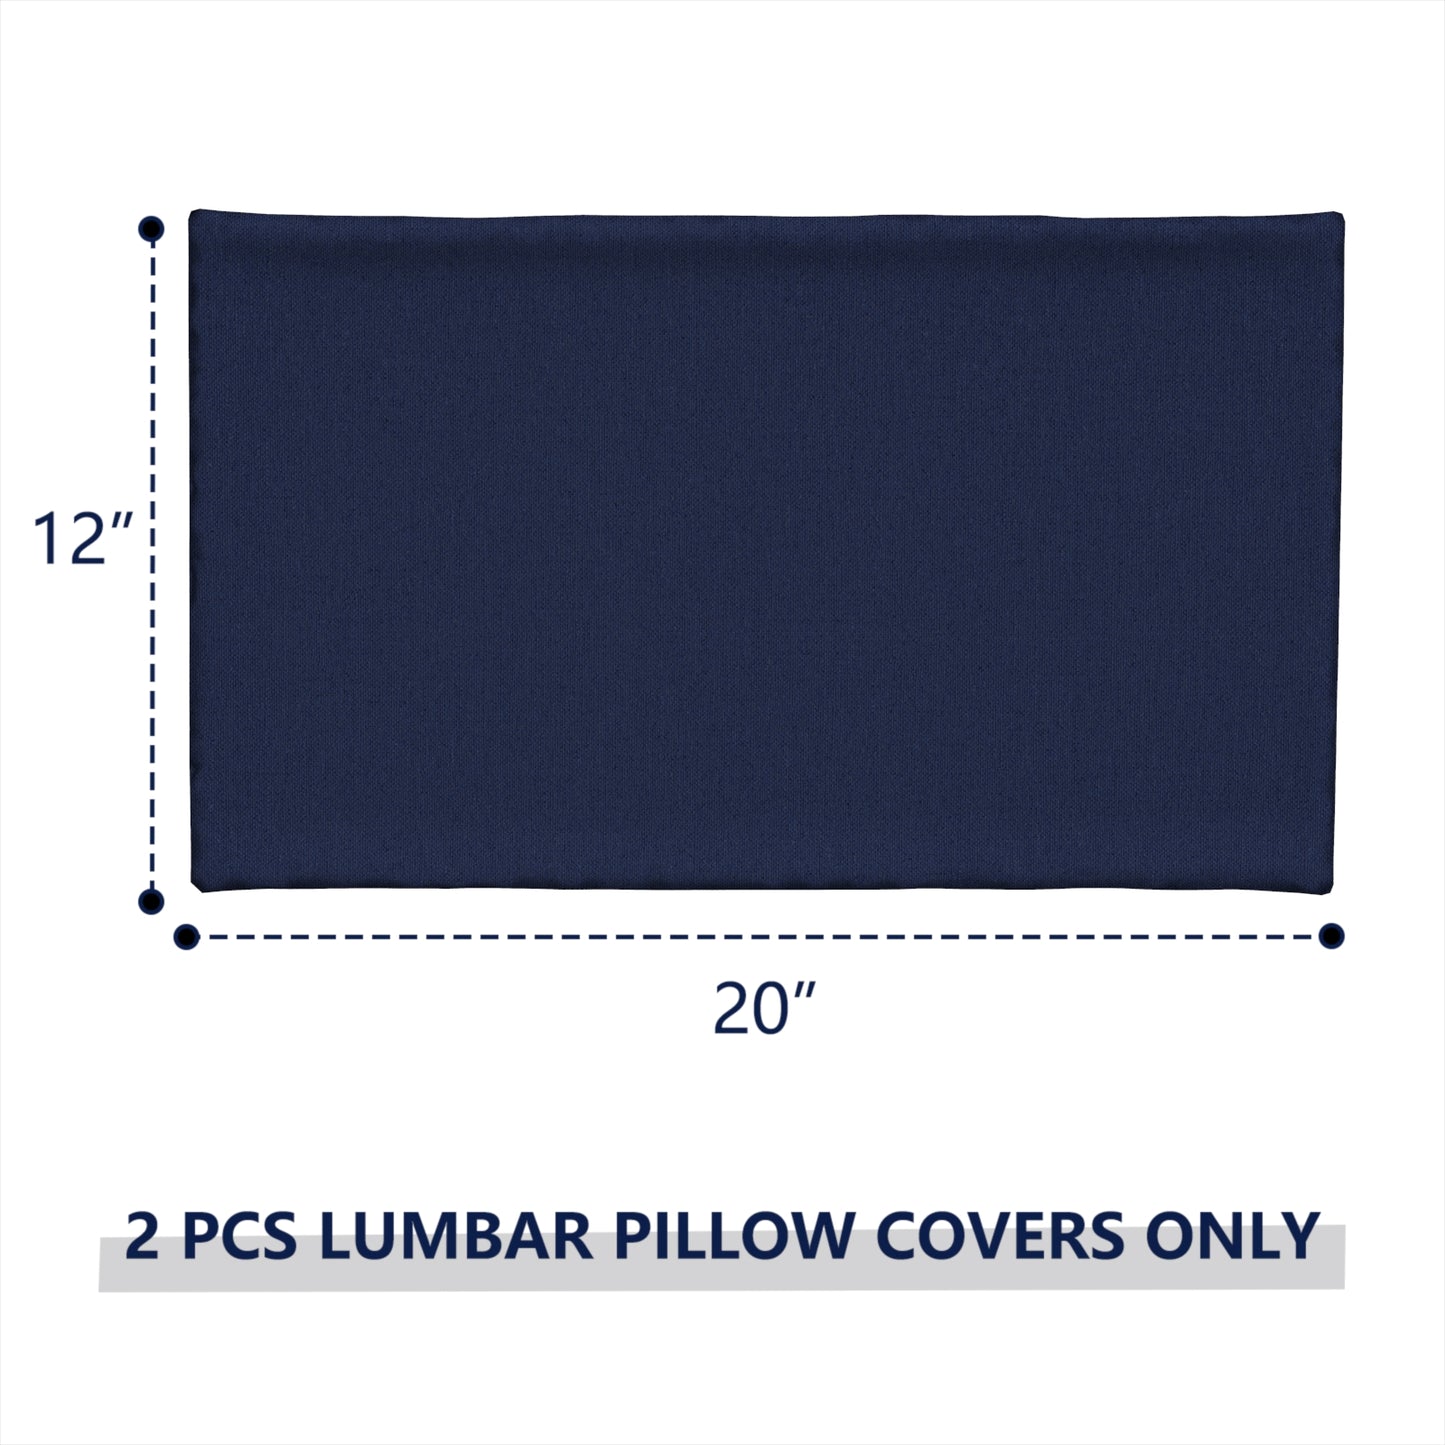 Melody Elephant Pack of 2 Outdoor Lumbar Pillow Covers, All Weather Cushion Pillow Cases 12x20 Inch, Pillowcase for Patio Couch Decoration, Navy Blue